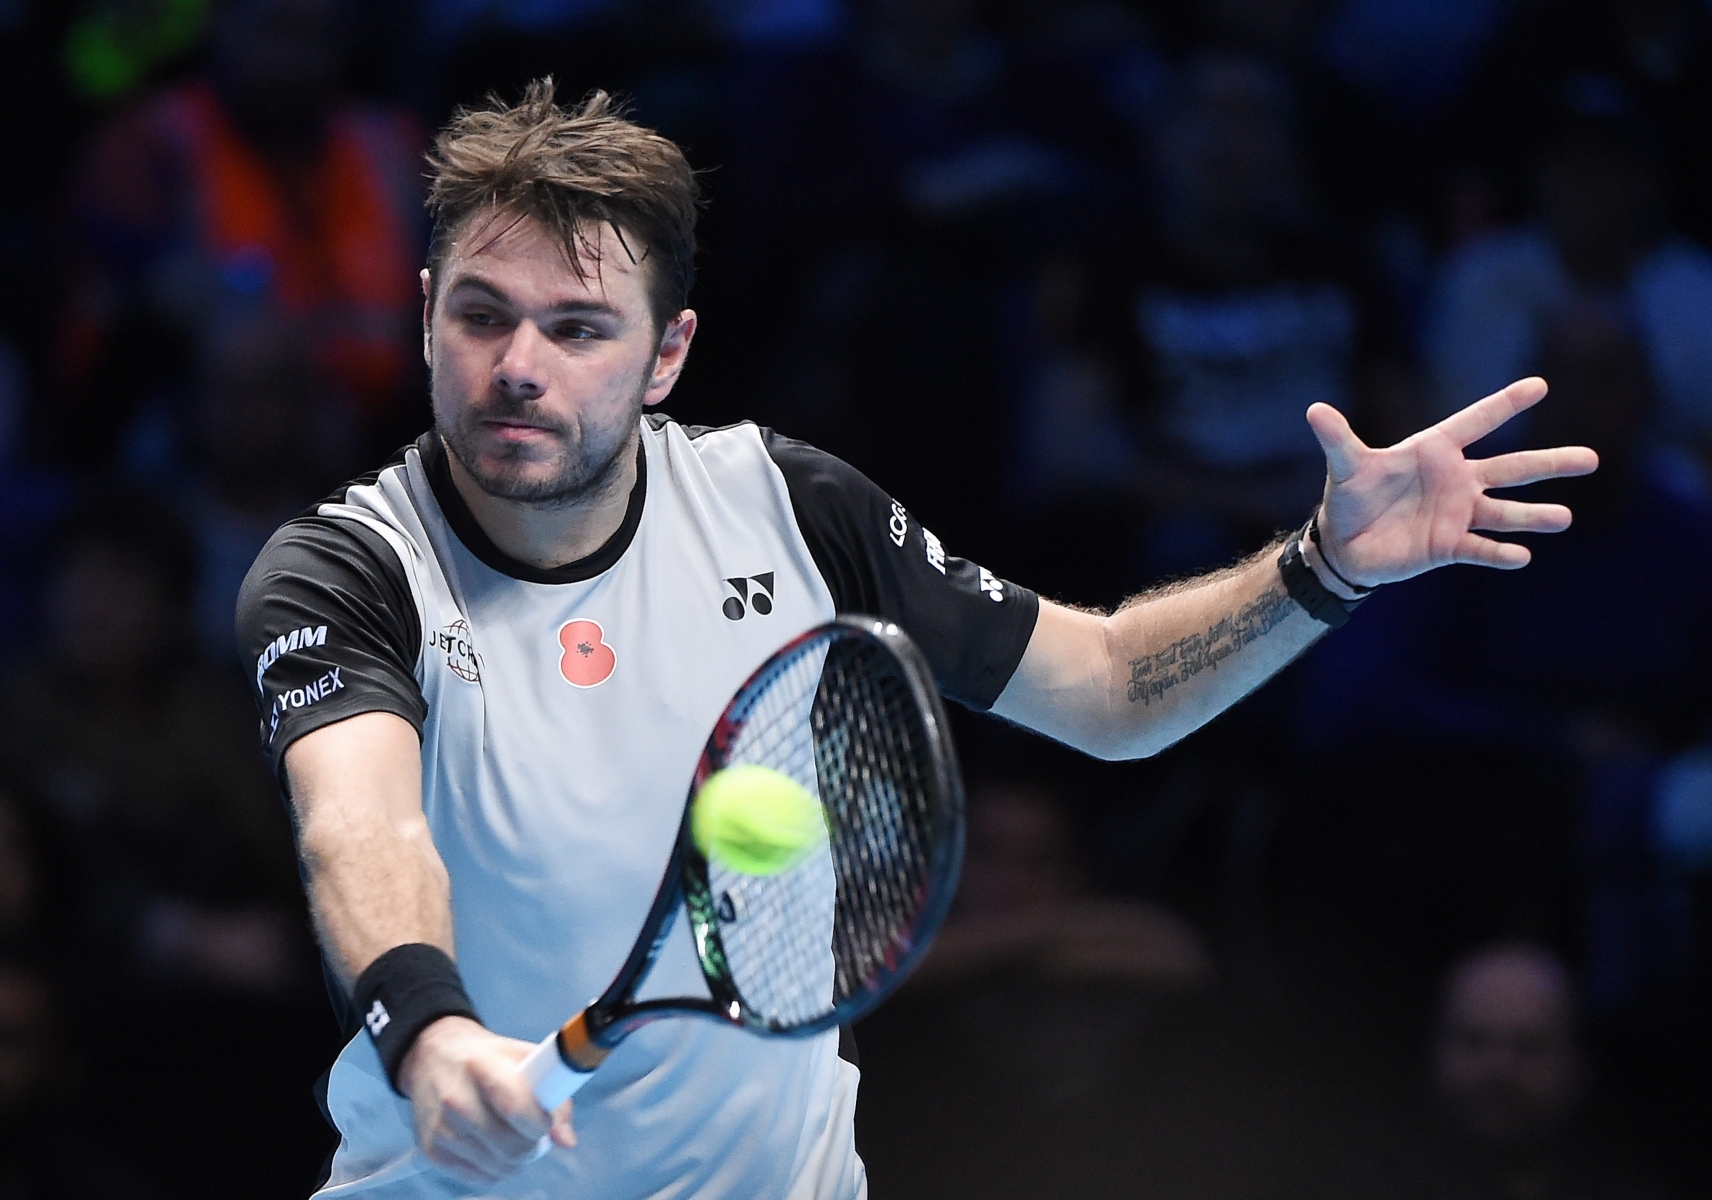 epa05631282 Switzerland's Stan Wawrinka returns to Japan's Kei Nishikori during their singles group stage match at the ATP World Tour finals tennis tournament at the O2 Arena in London, Britain, 14 November 2016.  EPA/ANDY RAIN BRITAIN TENNIS ATP WORLD TOUR FINALS